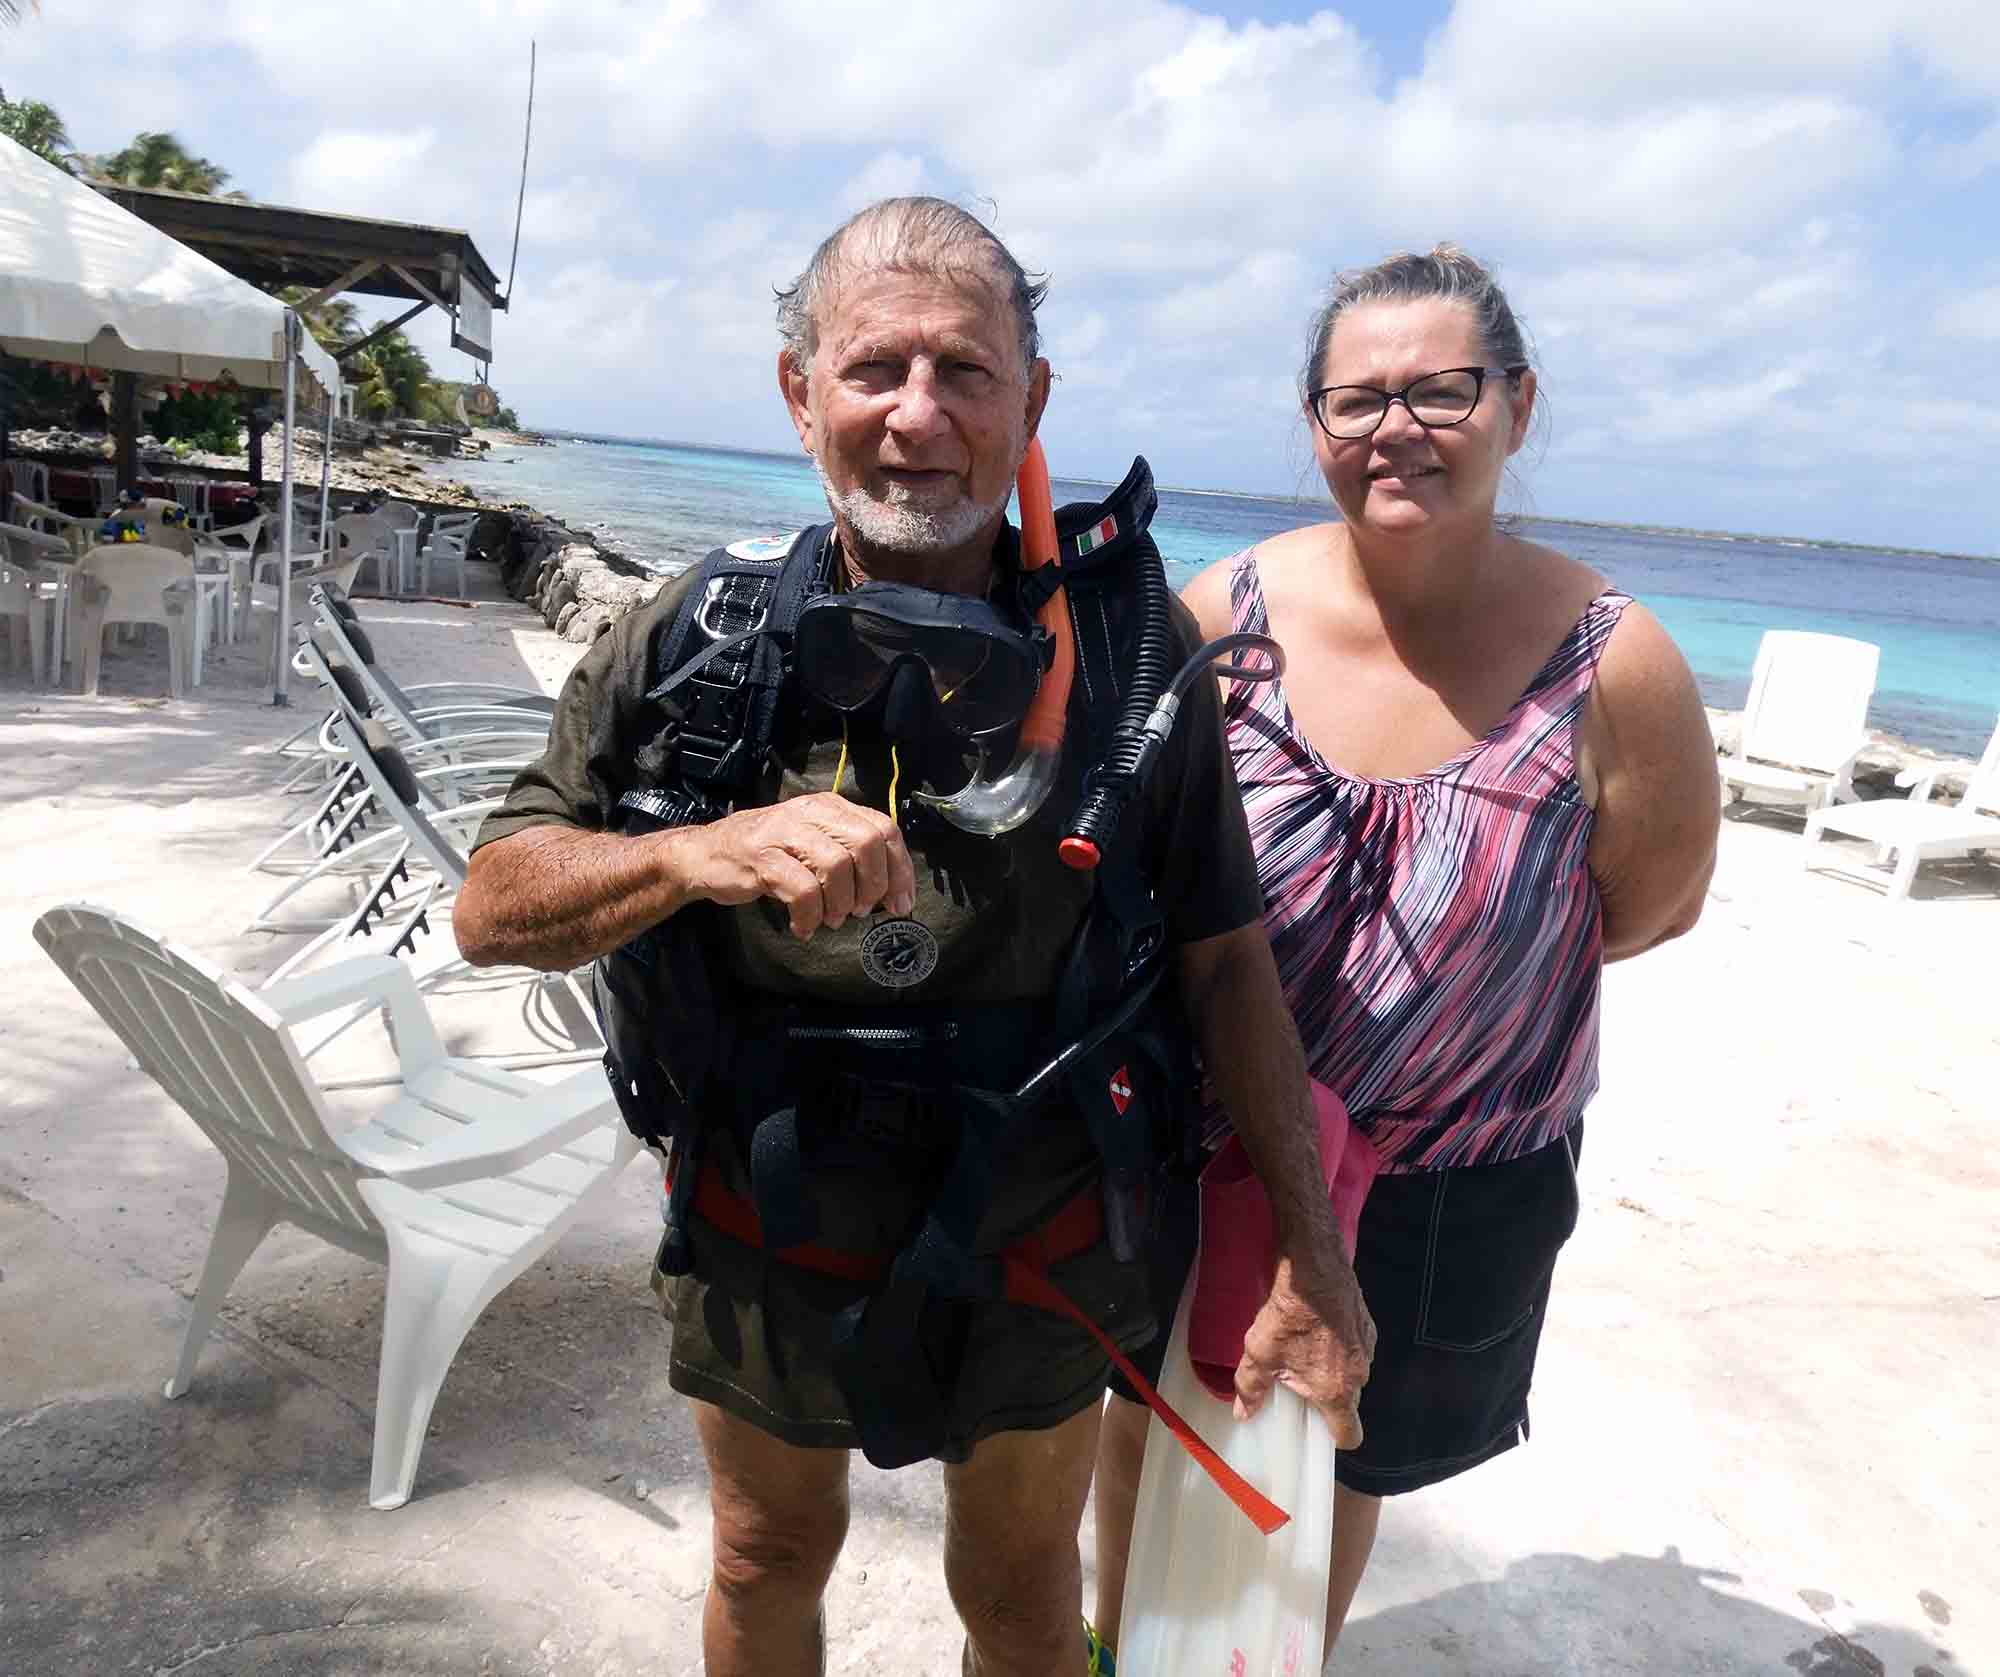 A dive pioneer turns 80 on Bonaire